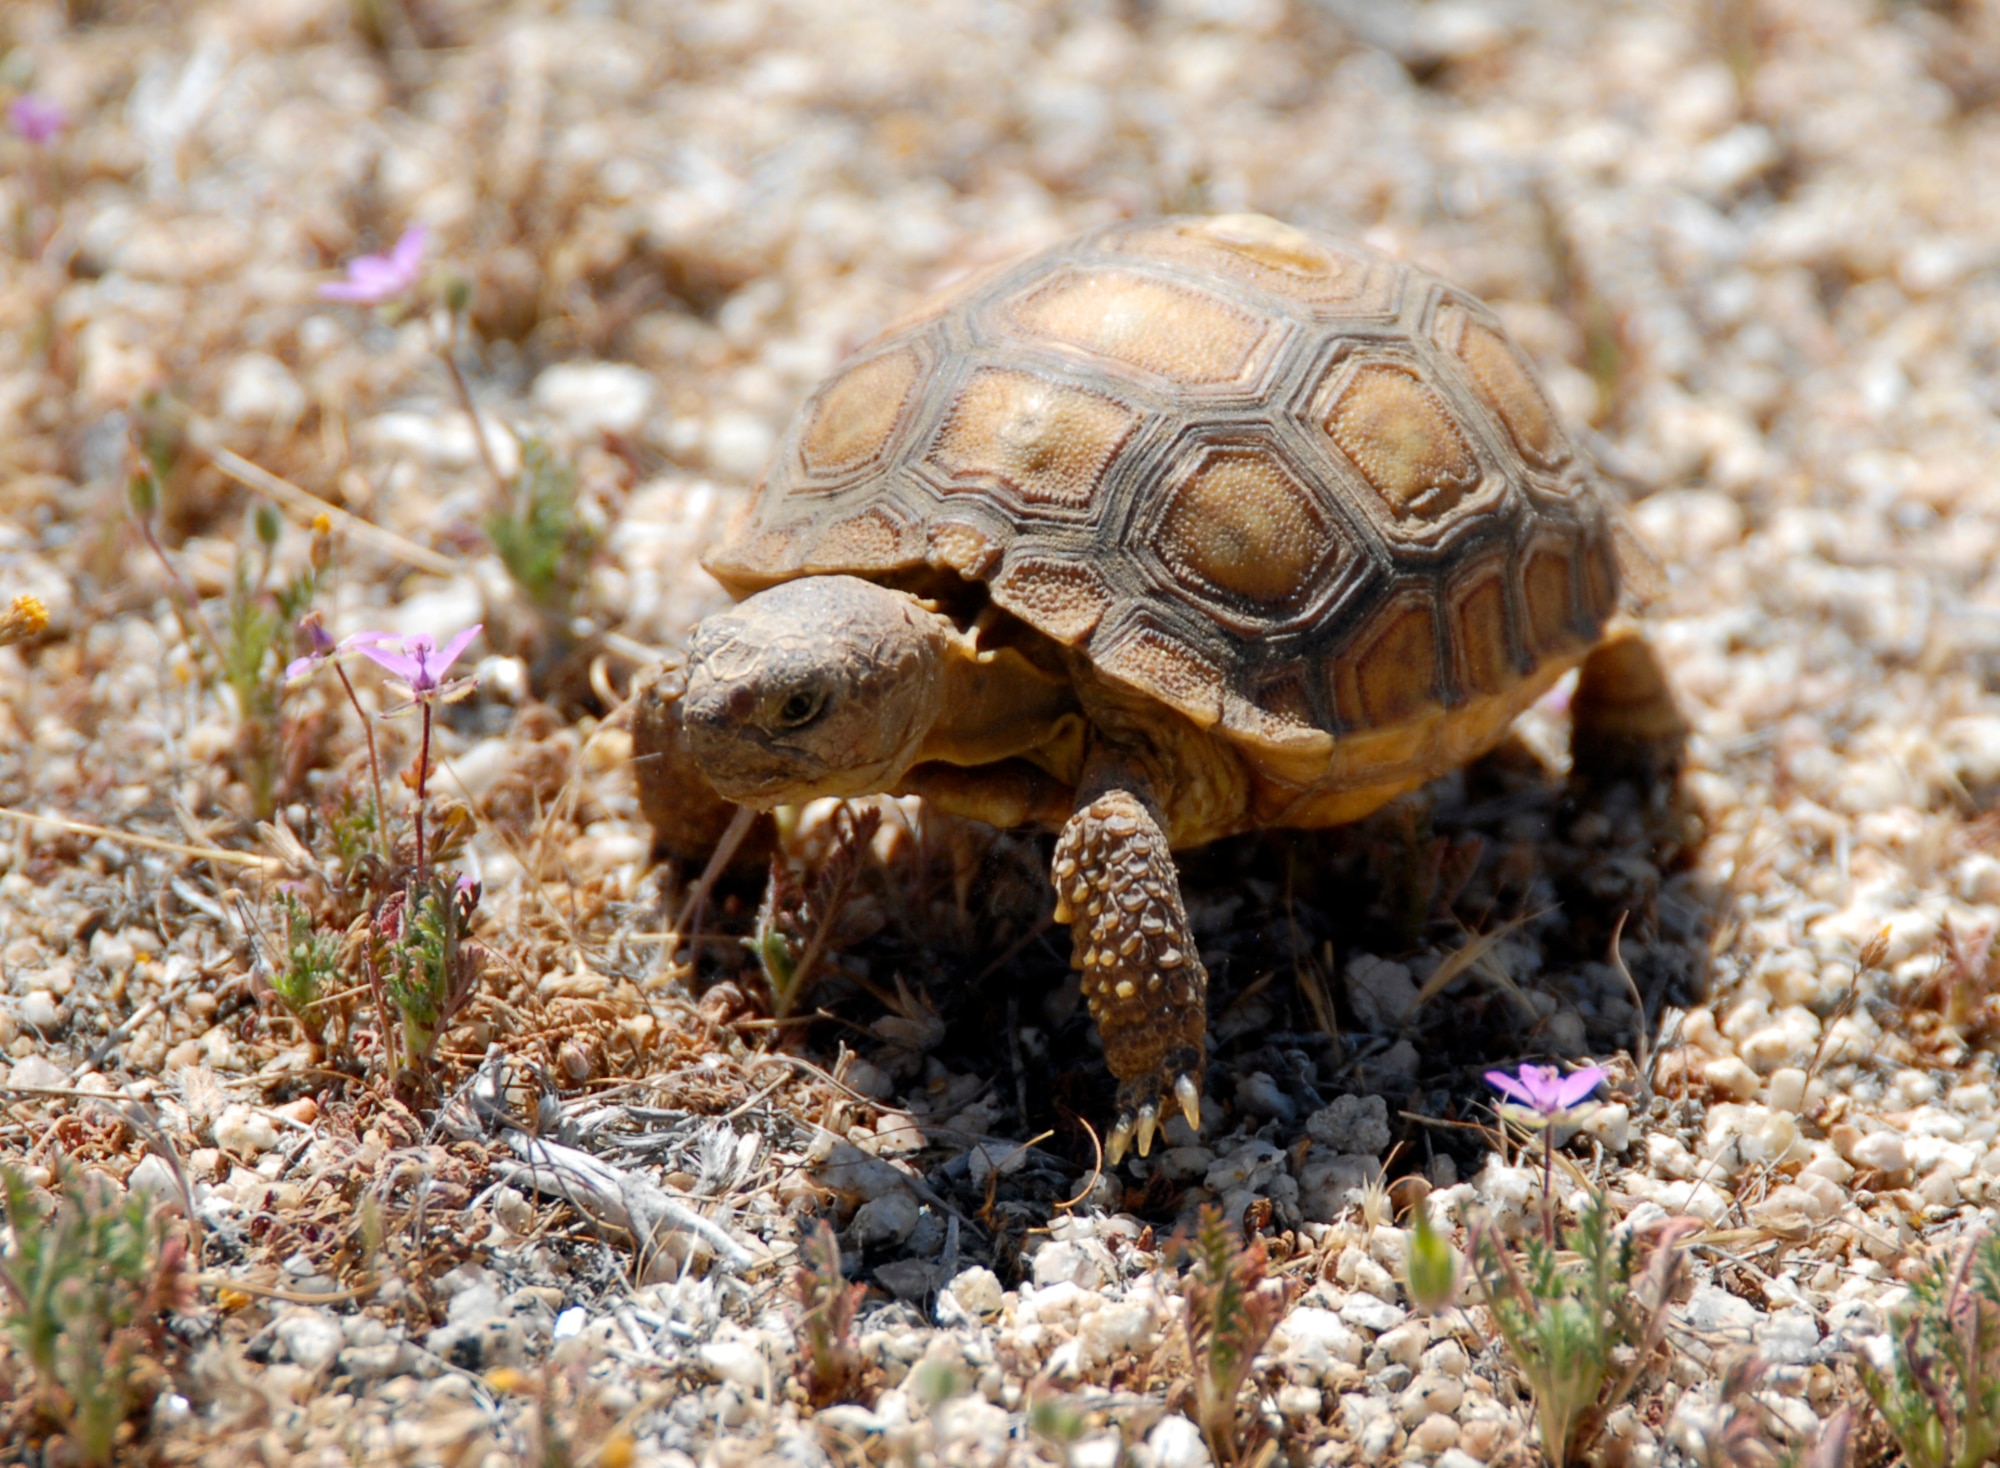 The desert tortoise is officially listed as "threatened" under the federal endangered species act. Environmental Management workers adopted the Head Start Program here to help bolster the population of younger age class tortoises to adult ages. (Air Force photo by Senior Airman Stacy Sanchez)